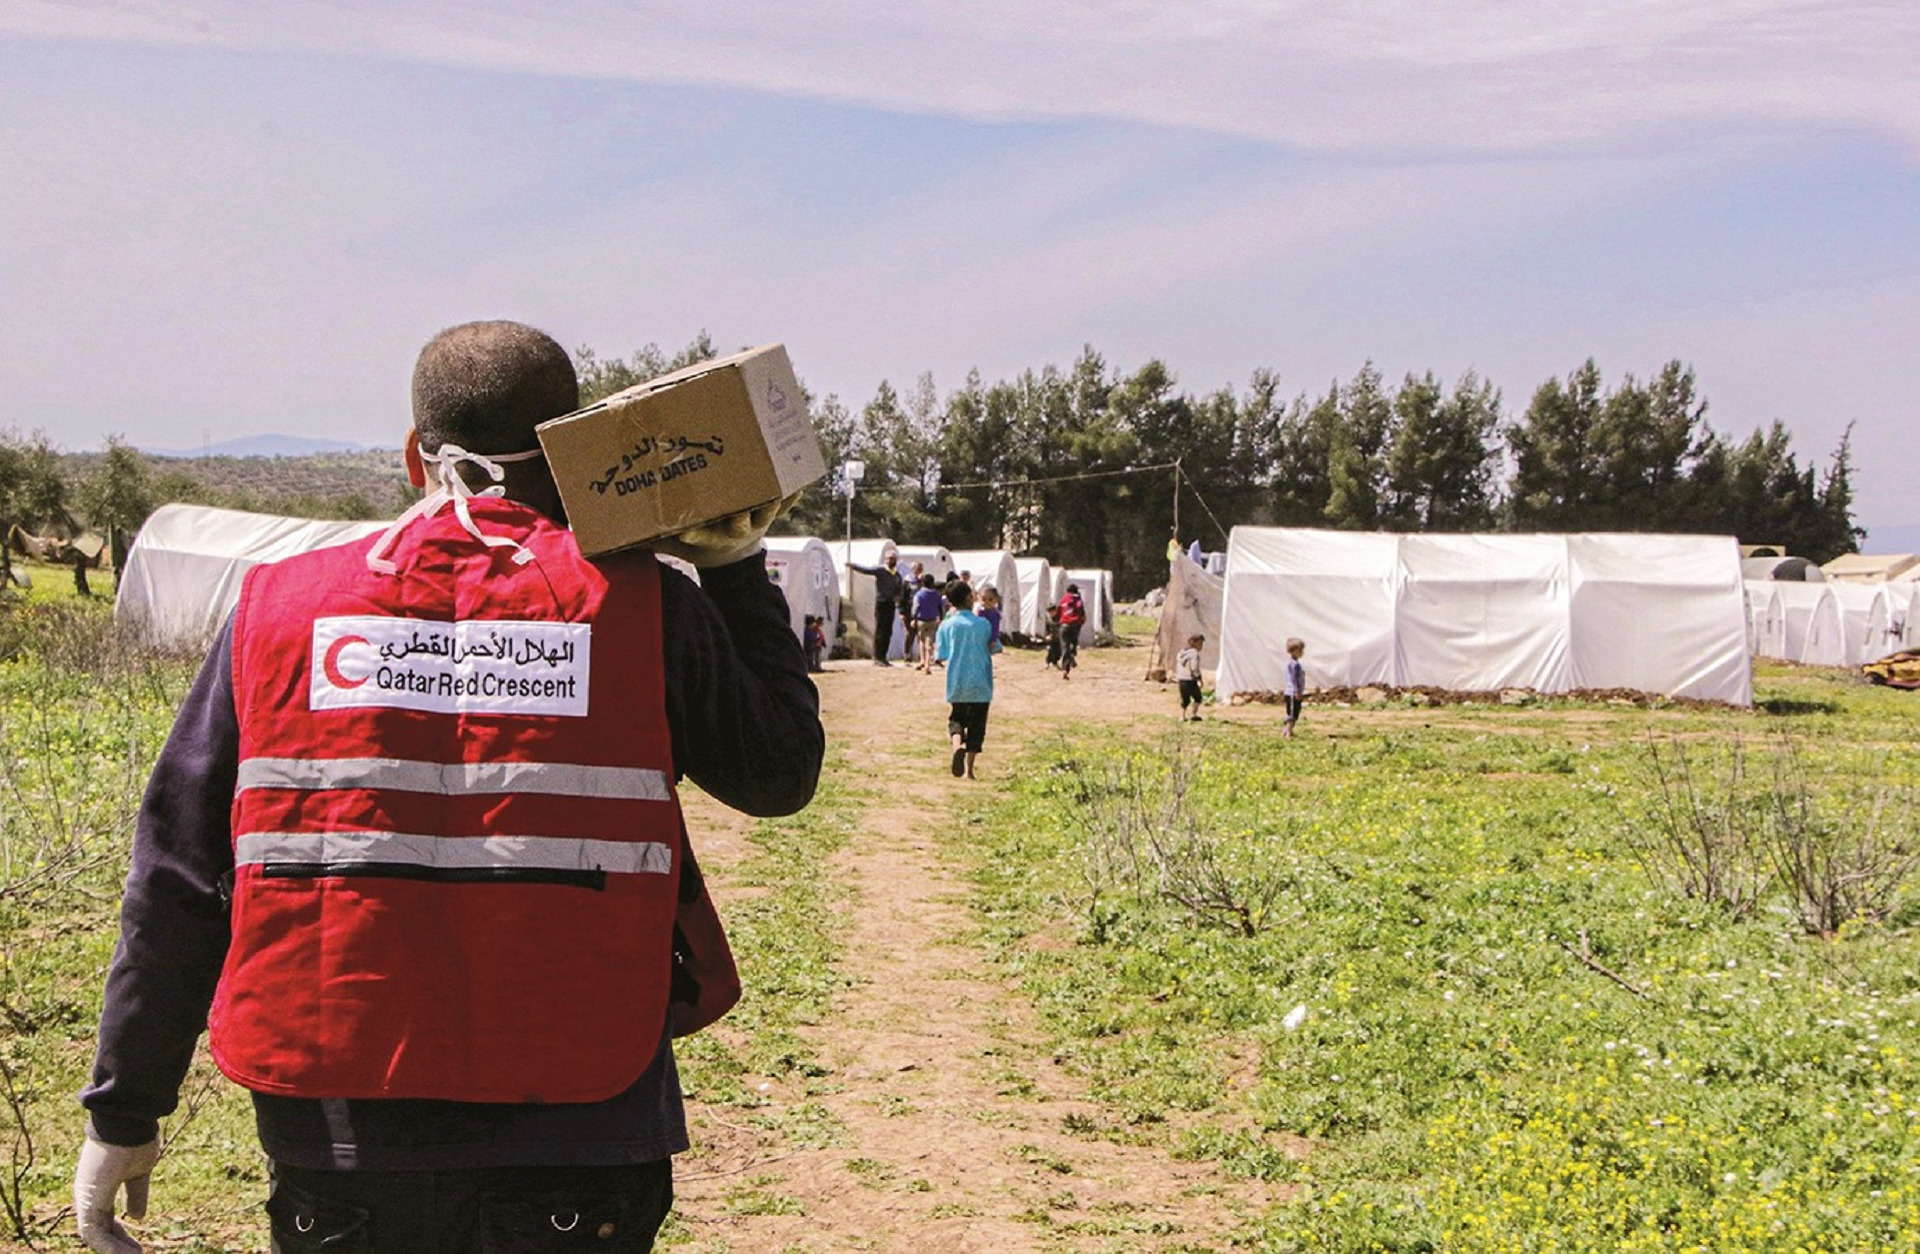 Qatar Red Crescent Employer holding food in a refugees camp